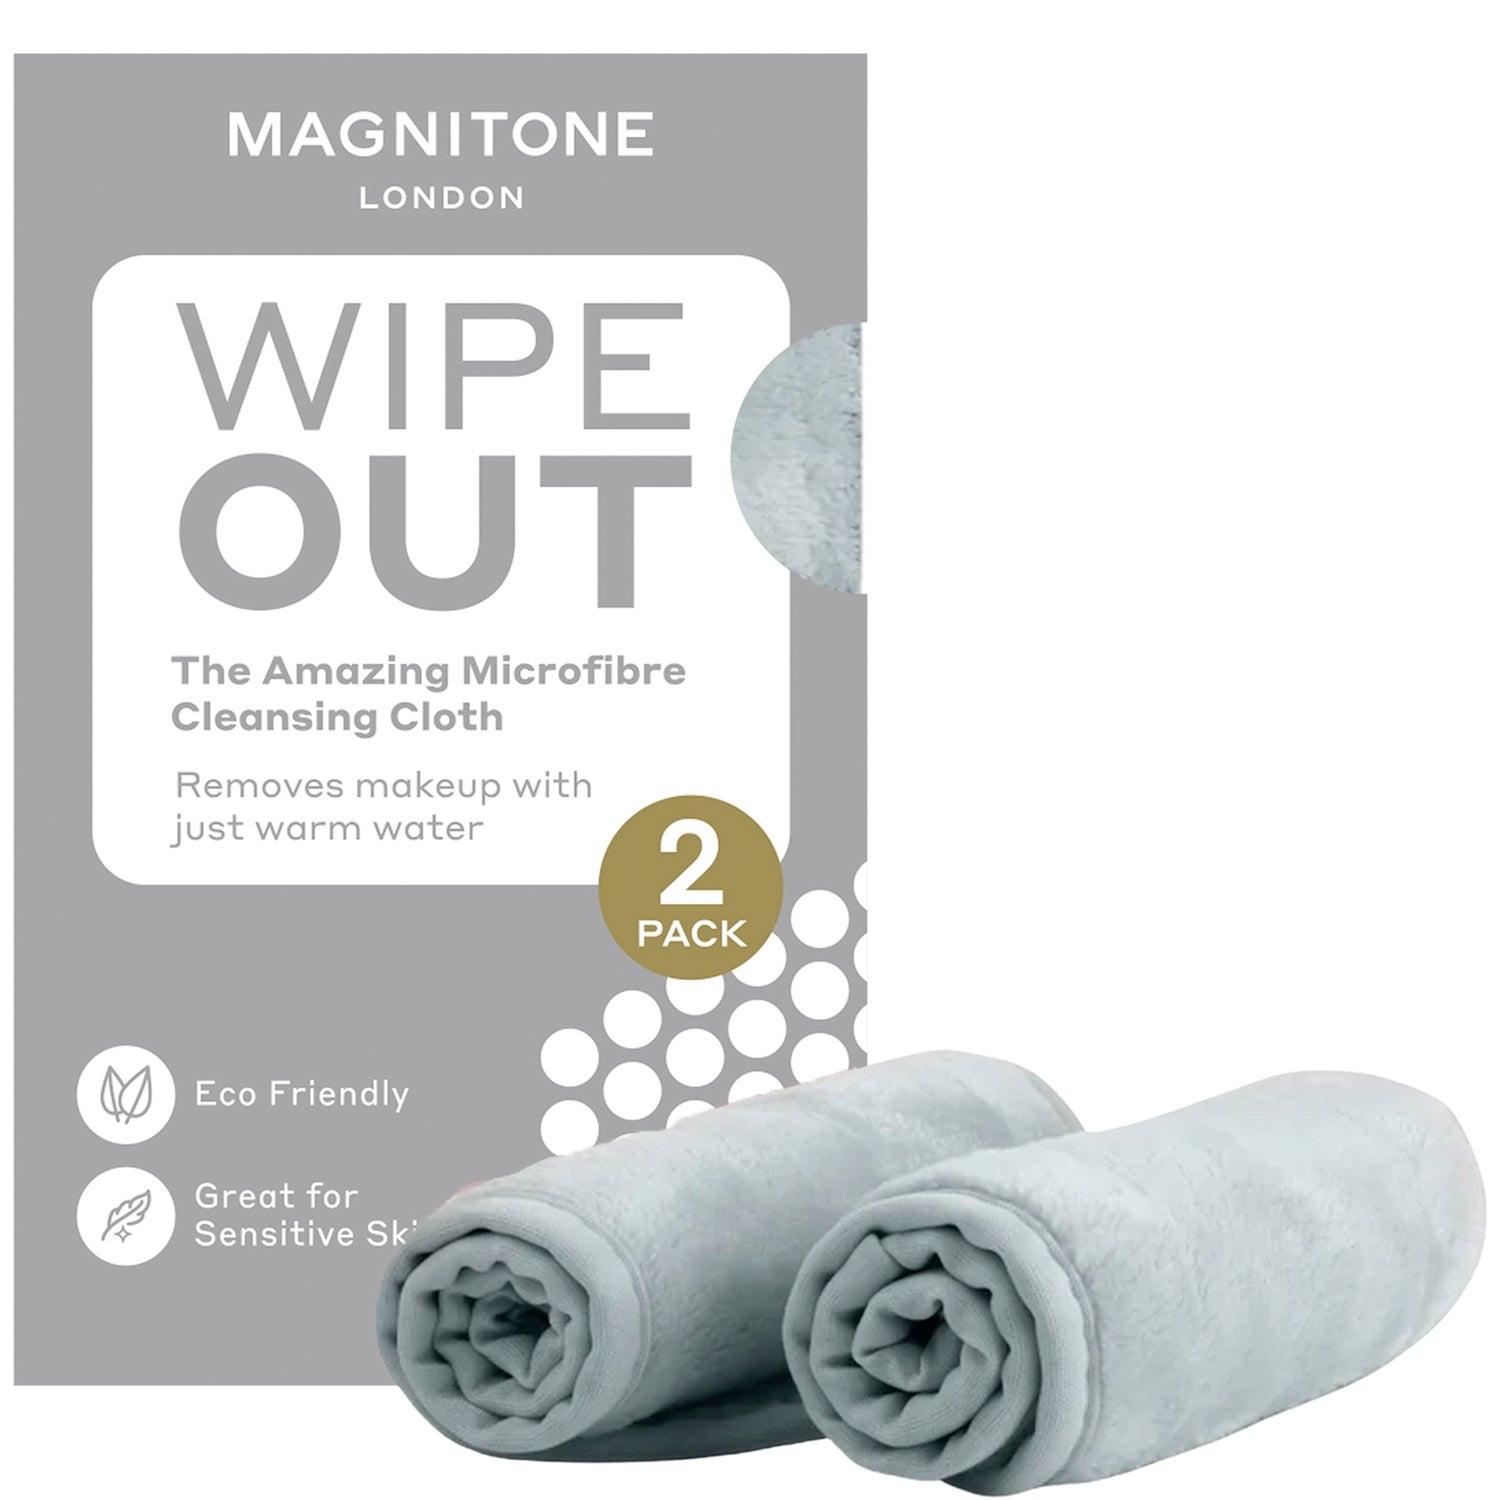 MAGNITONE London WipeOut! The Amazing MicroFibre Cleansing Cloth Grey (x 2)